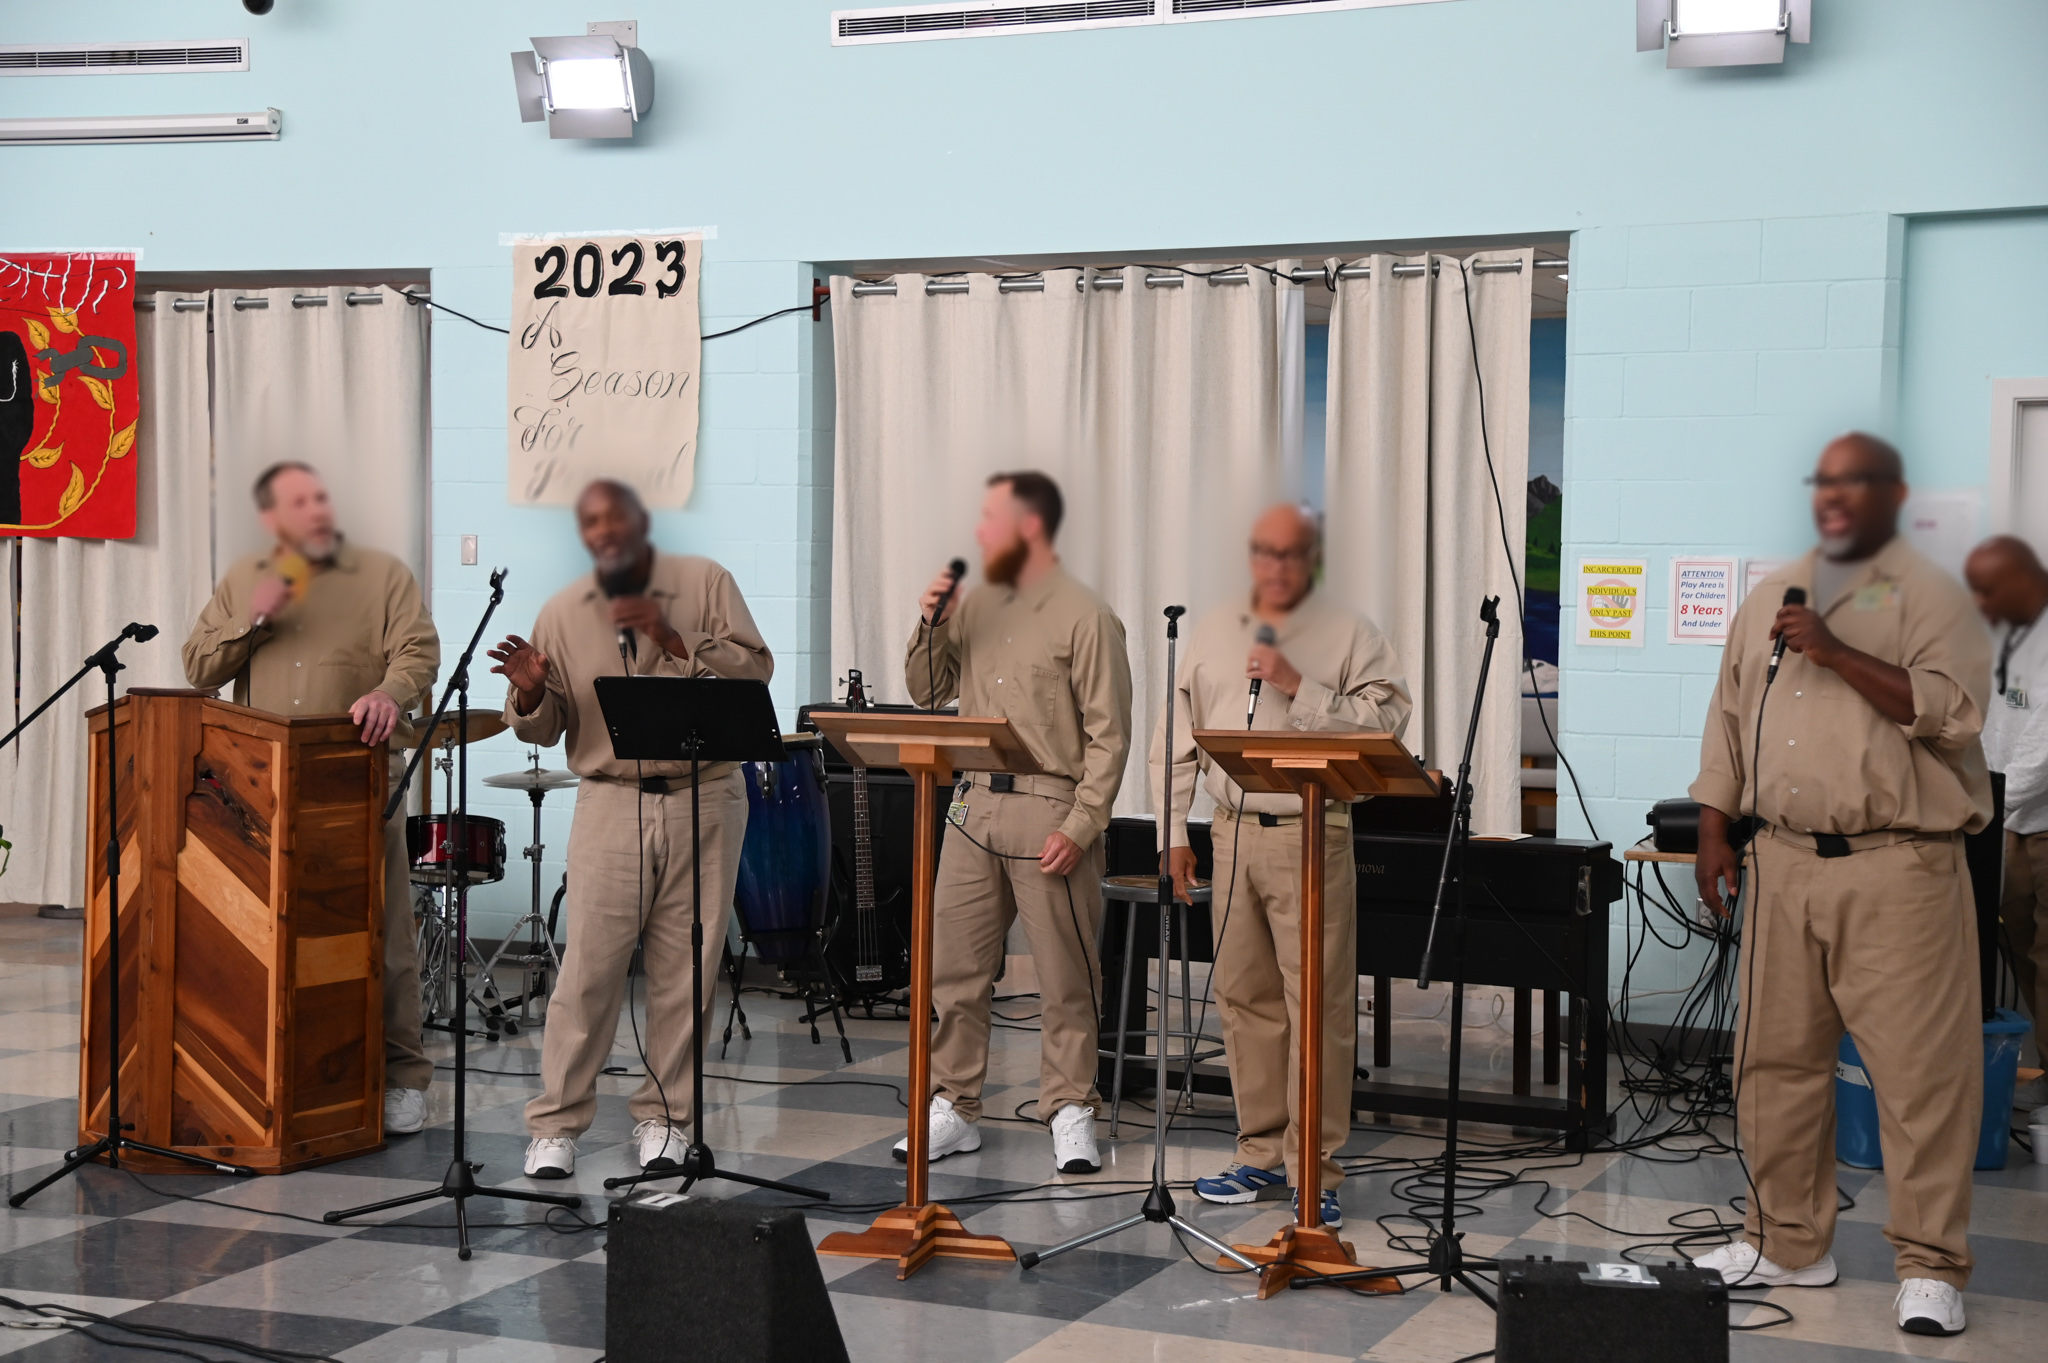 Airway Heights Corrections Center’s gospel band performing at the Juneteenth Celebration